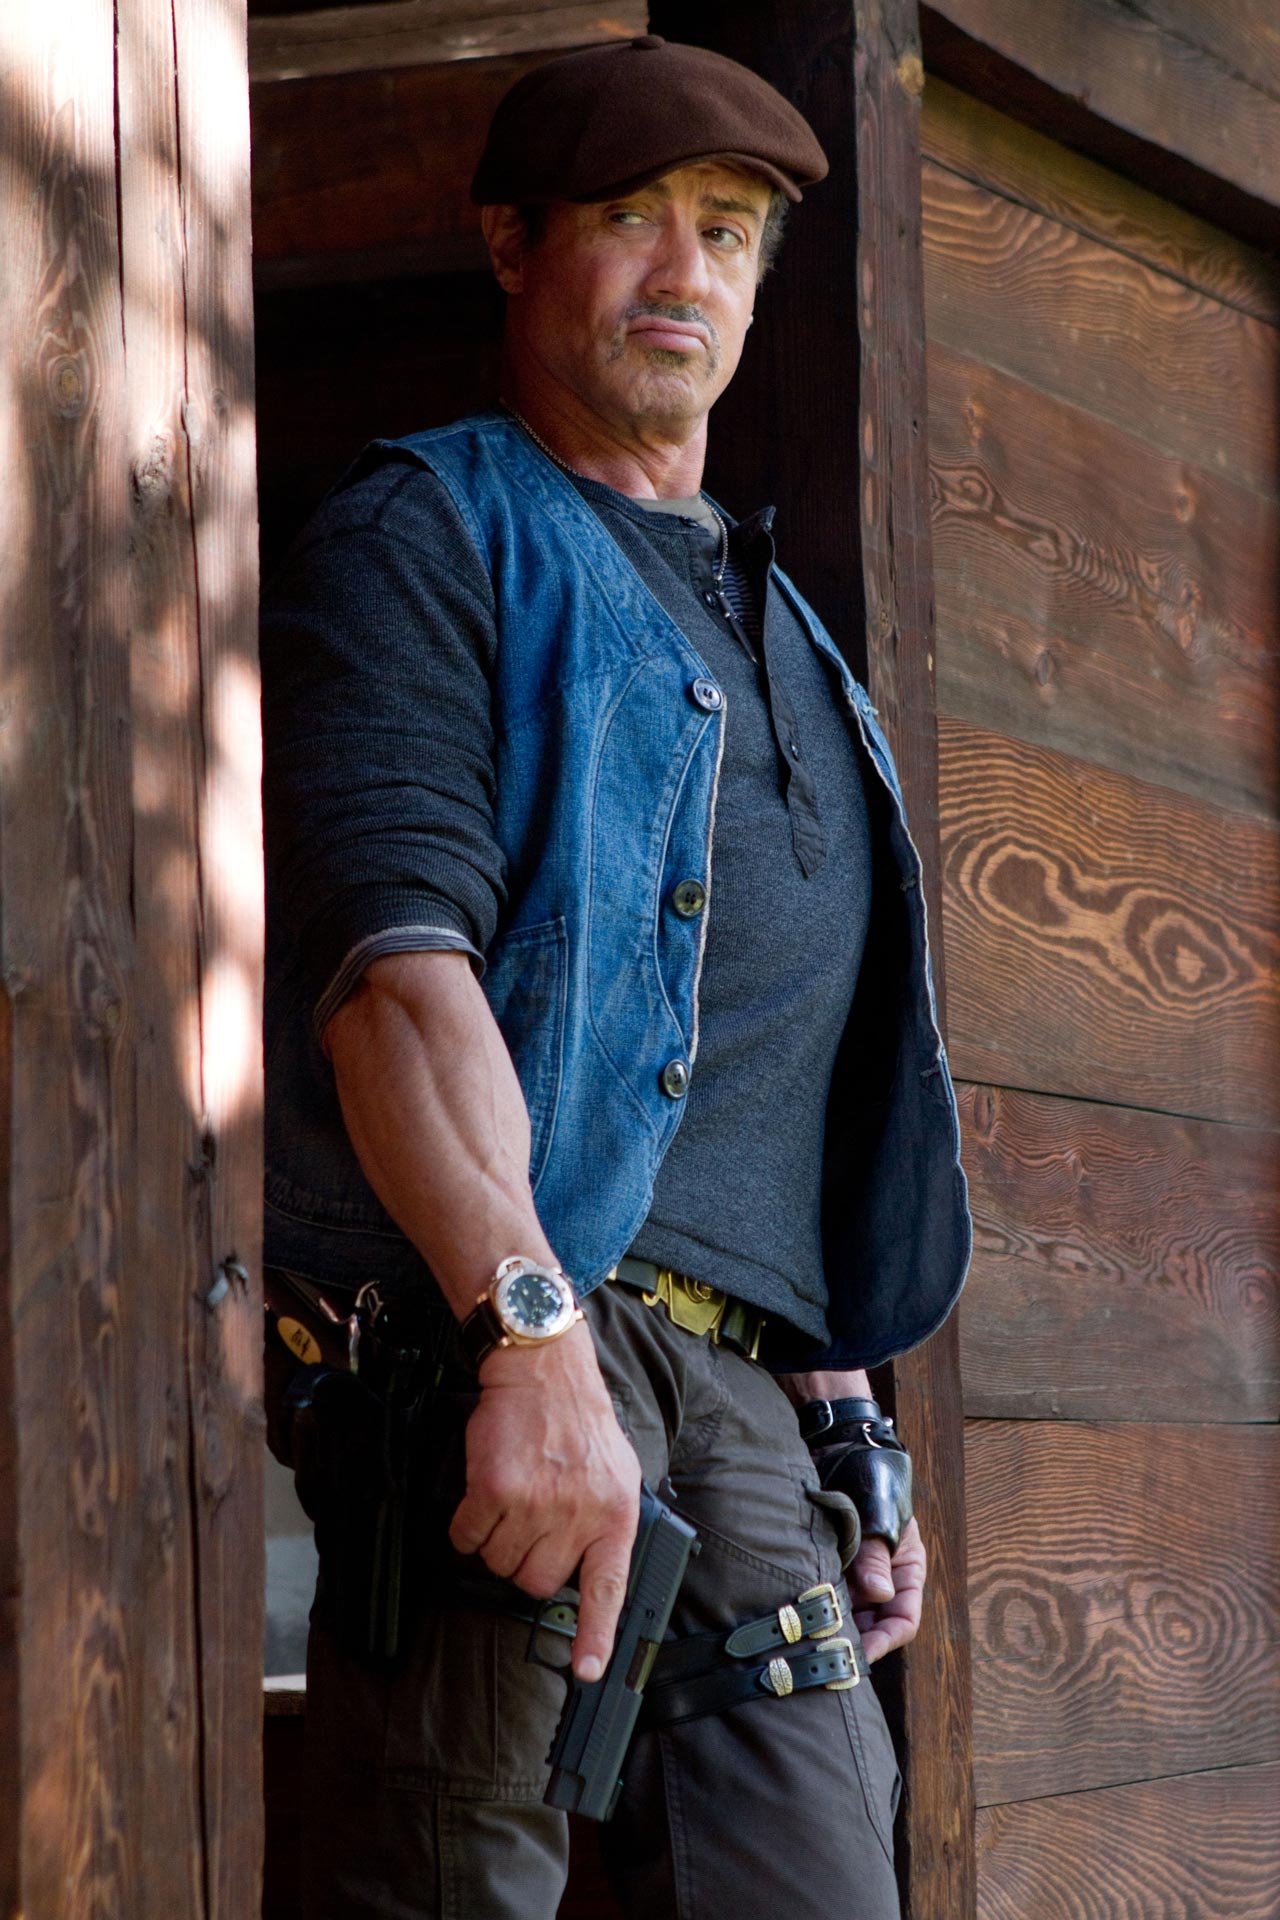 The Expendables 2, Barney Ross (Sylvester Stallone)